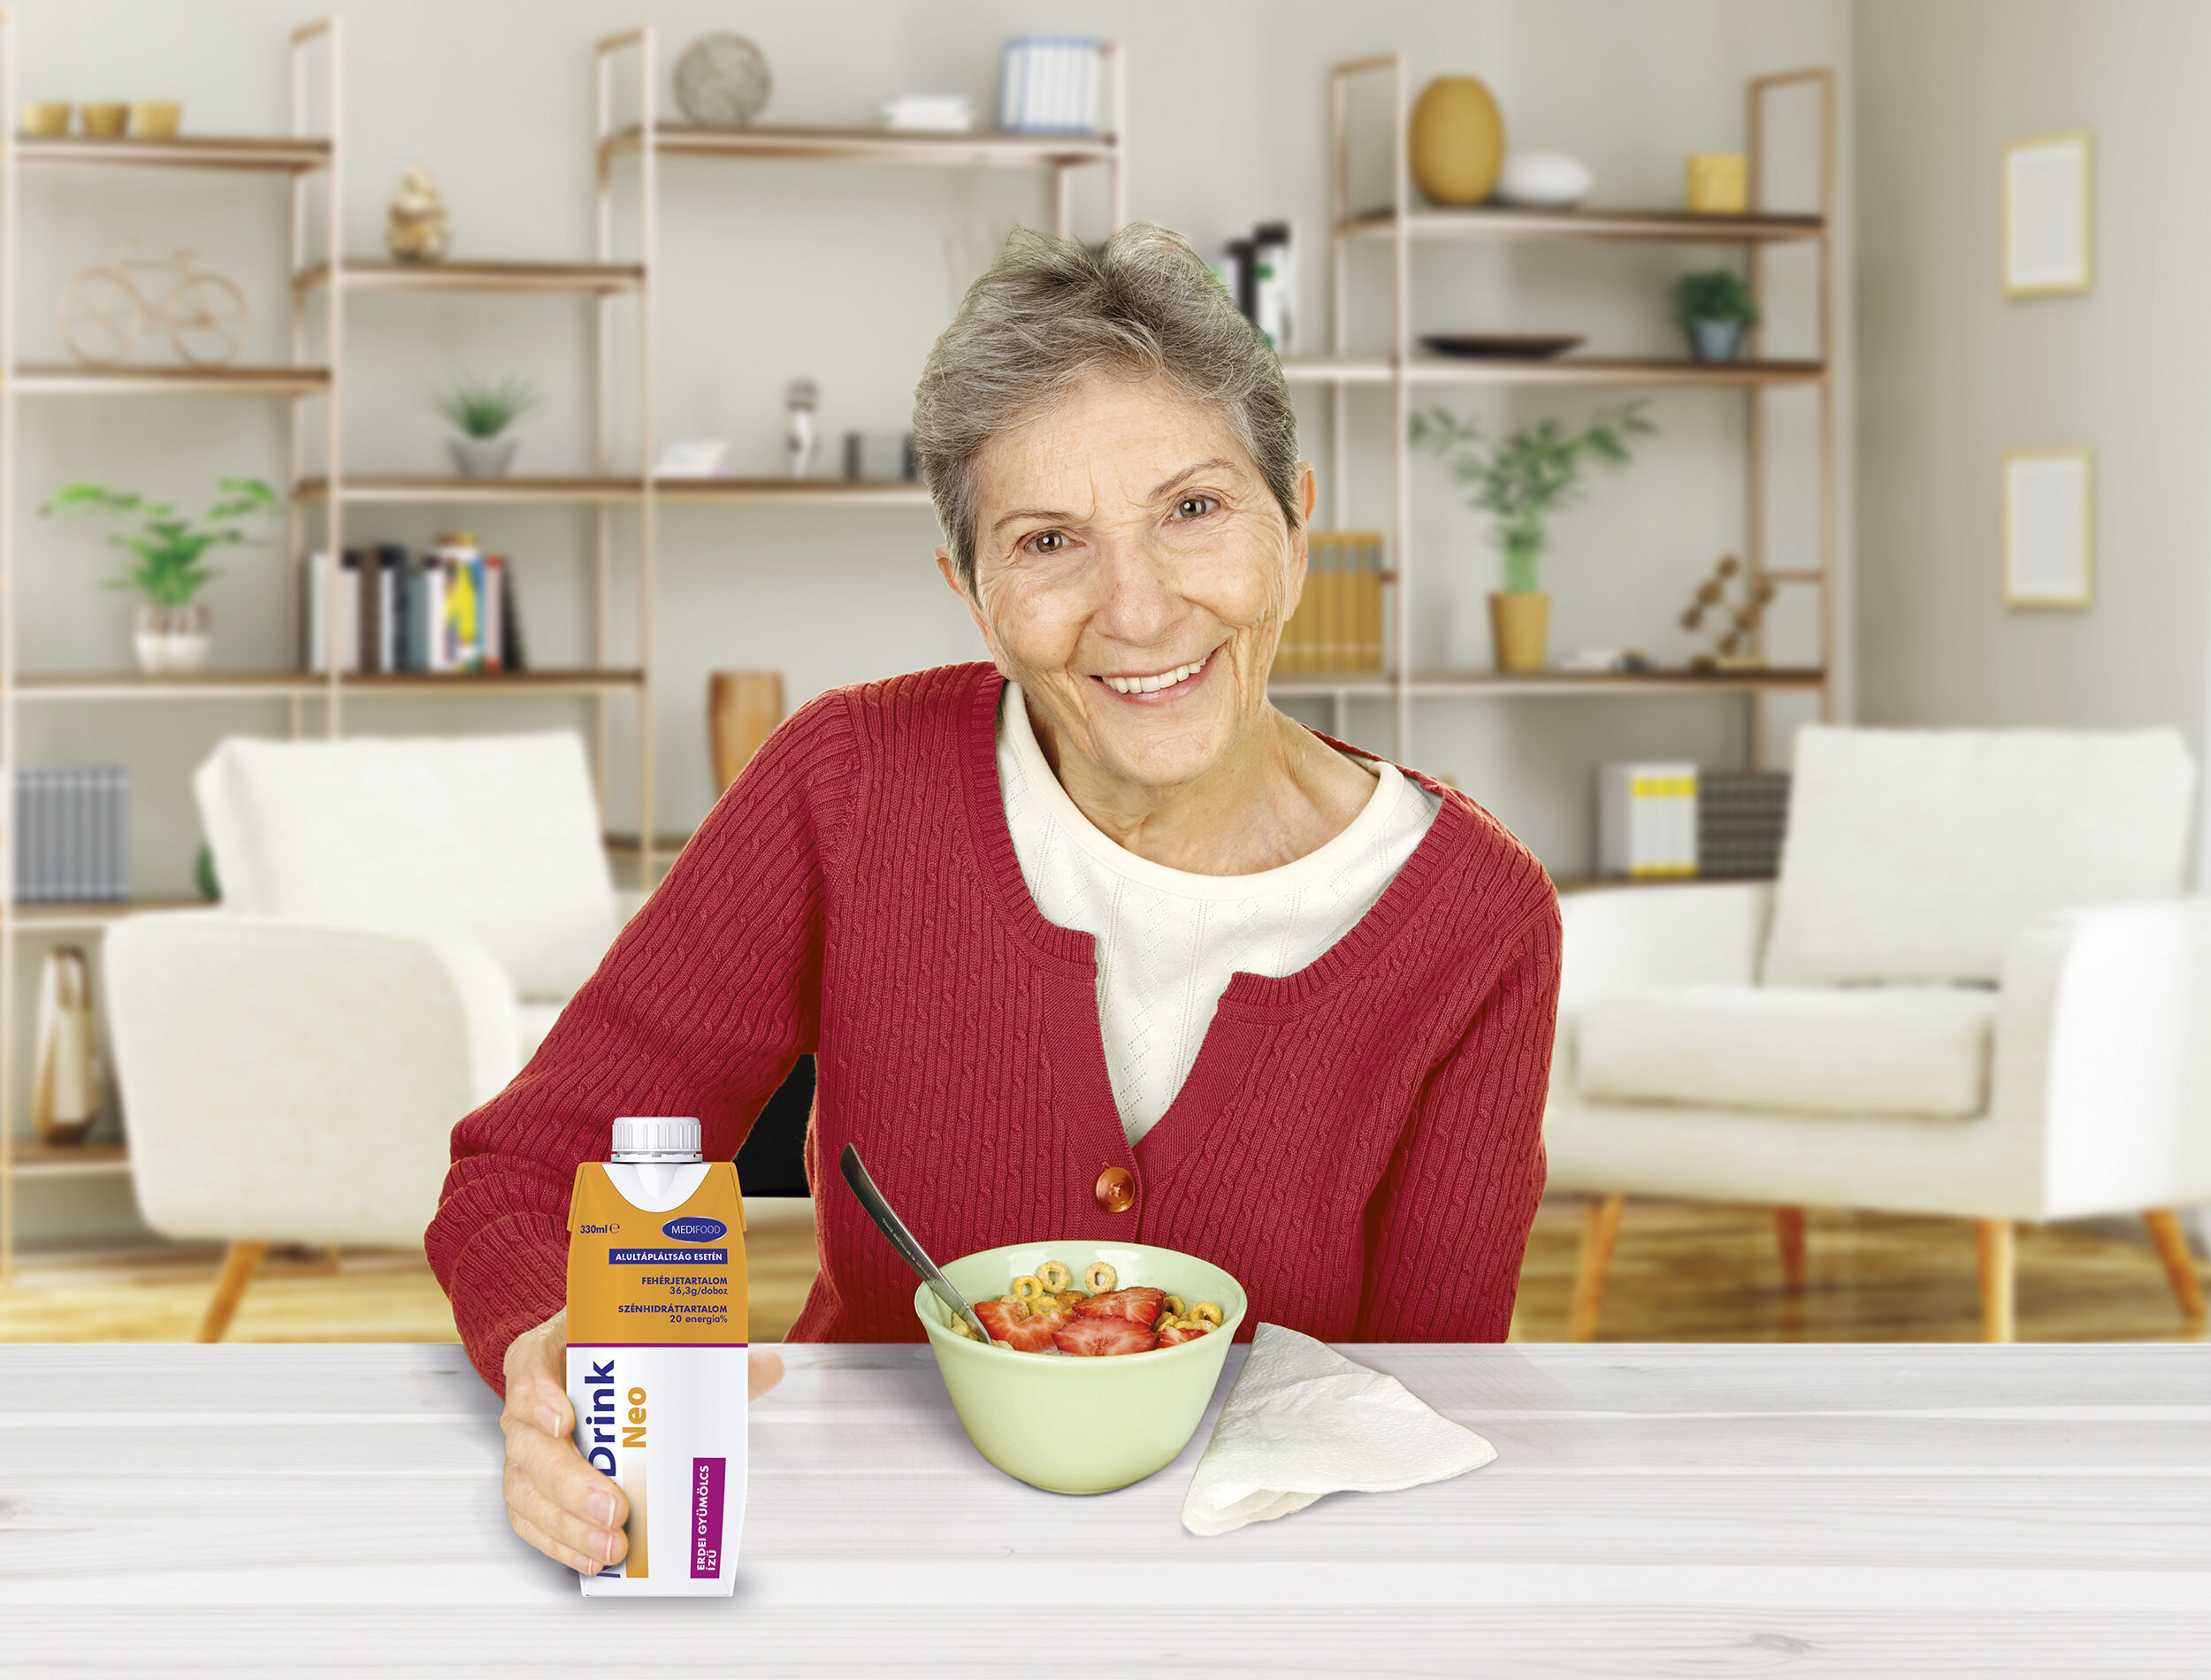 A senior woman enjoying a breakfast of cereal with strawberries and orange juice.